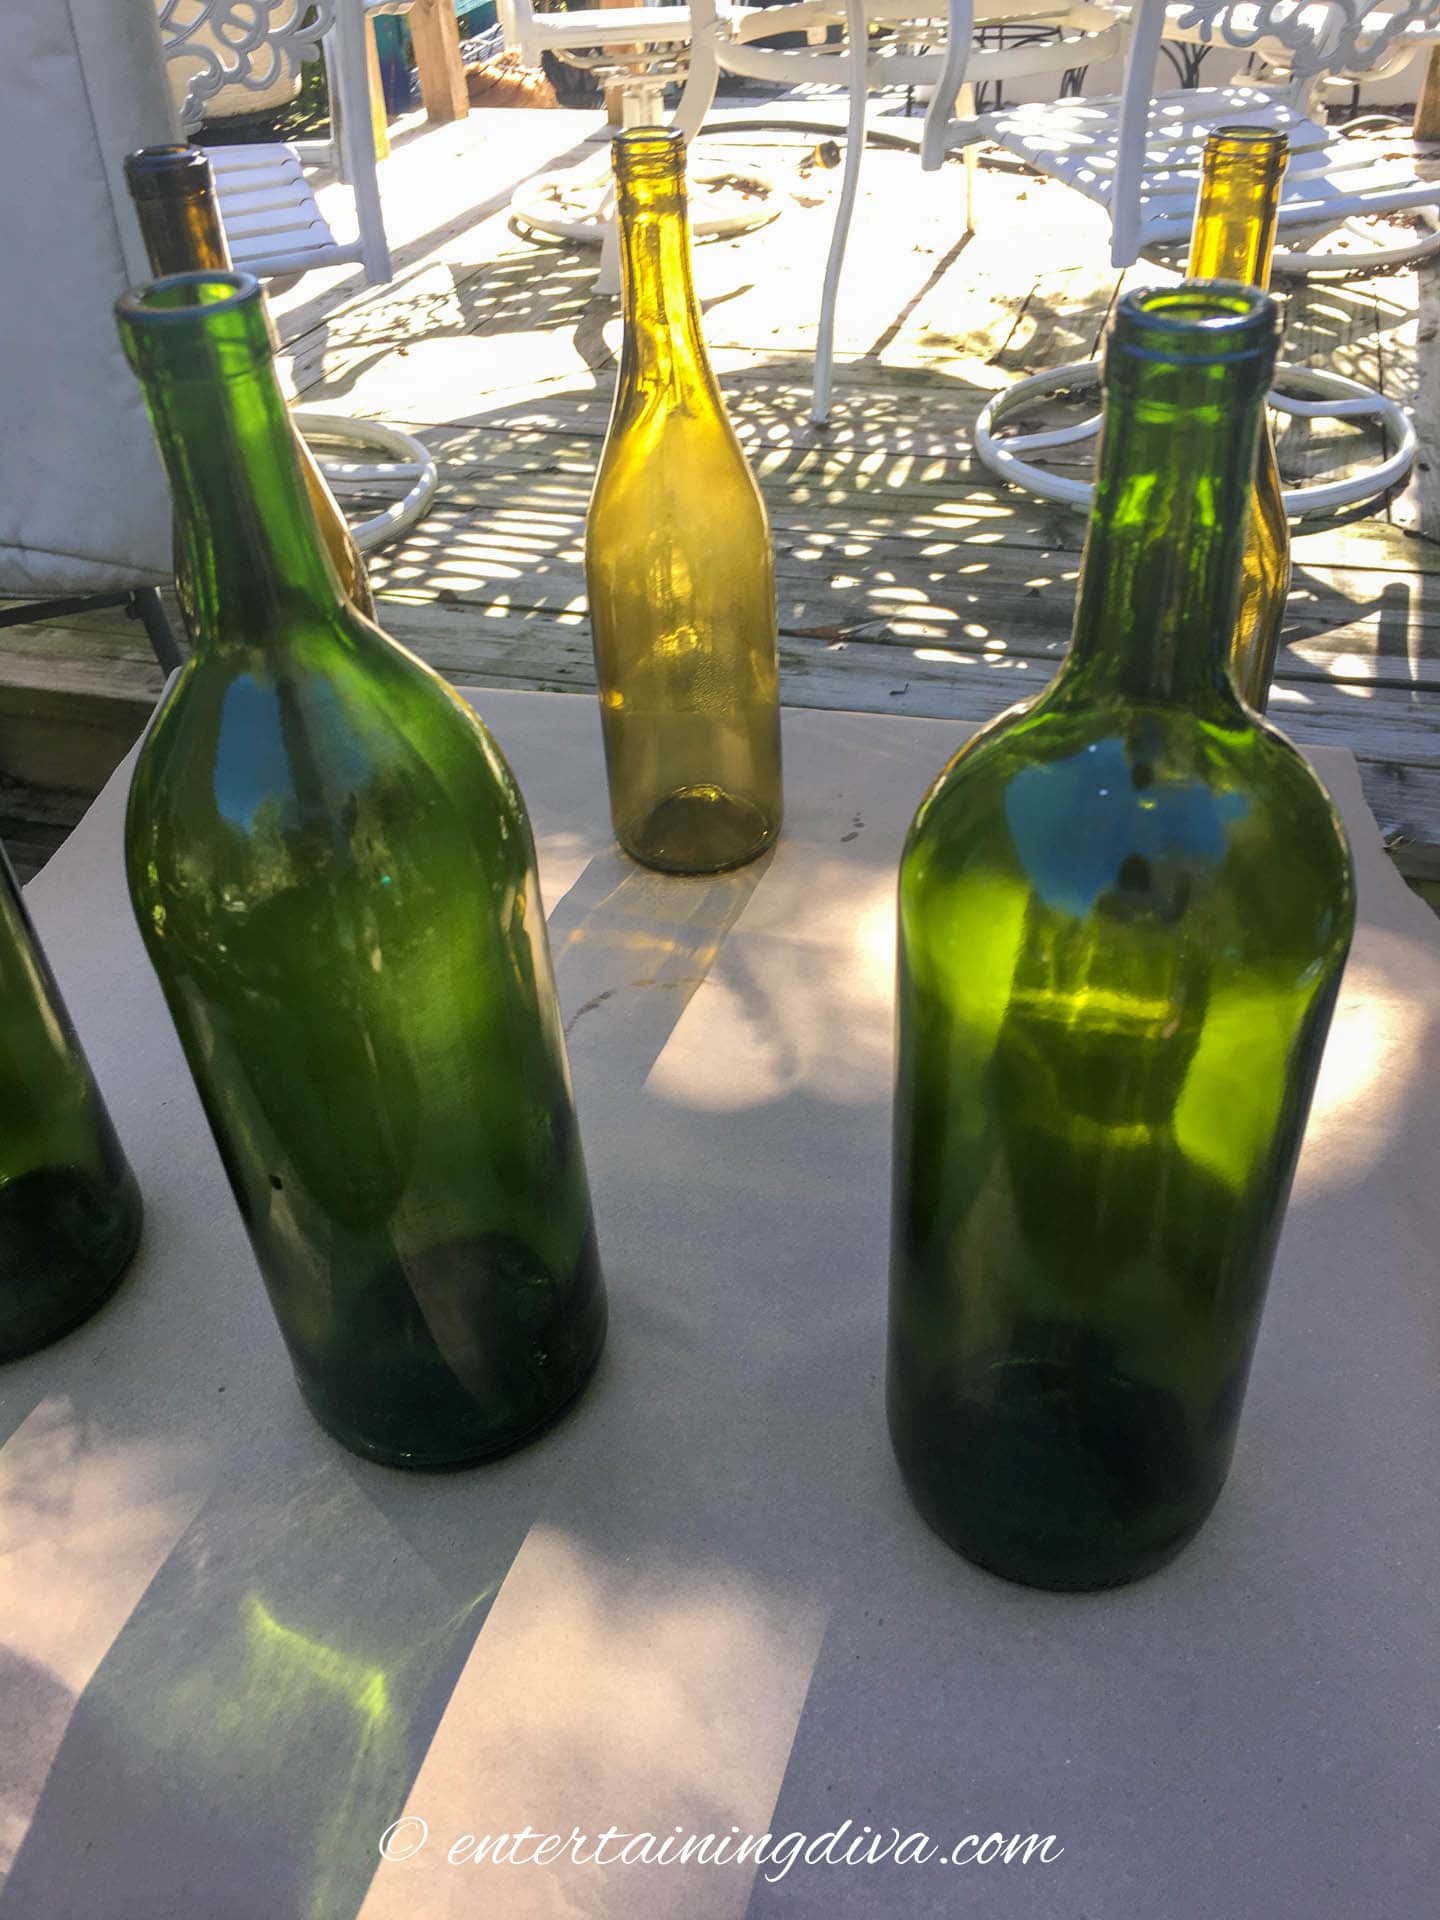 Wine bottles spread out on a piece of cardboard